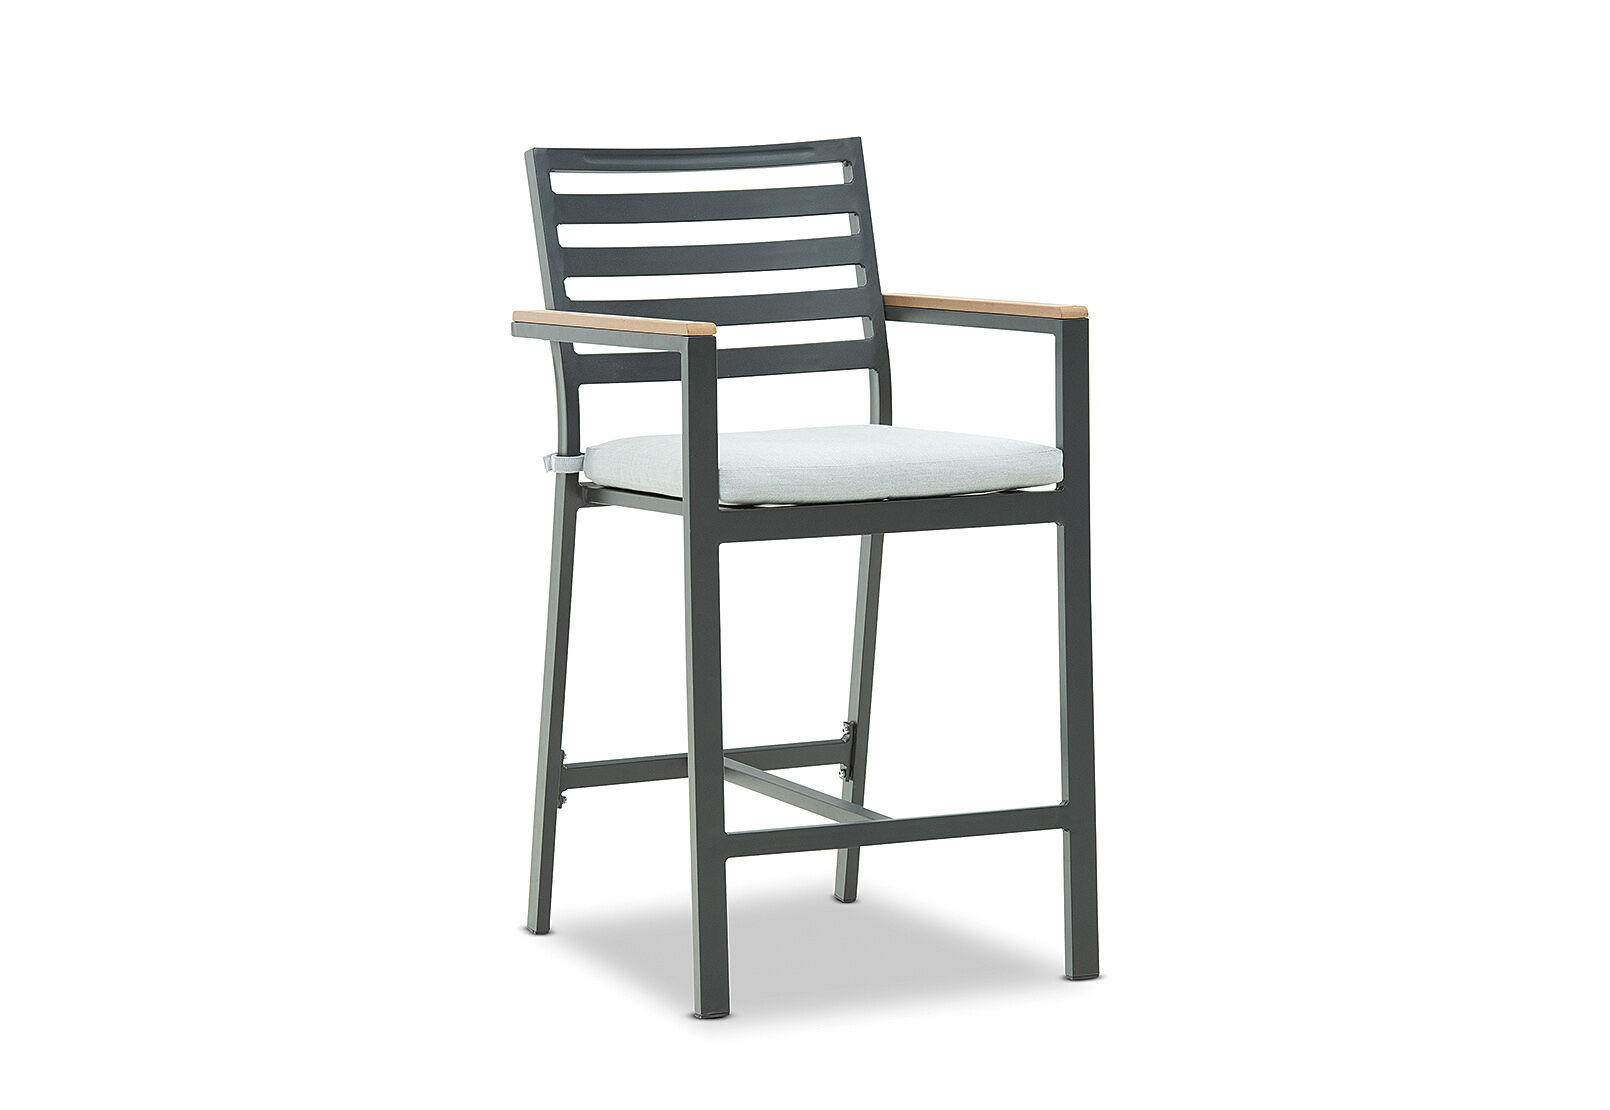 Charcoal Mornington Outdoor Bar Chair, Outdoor Bar Chairs With Arms